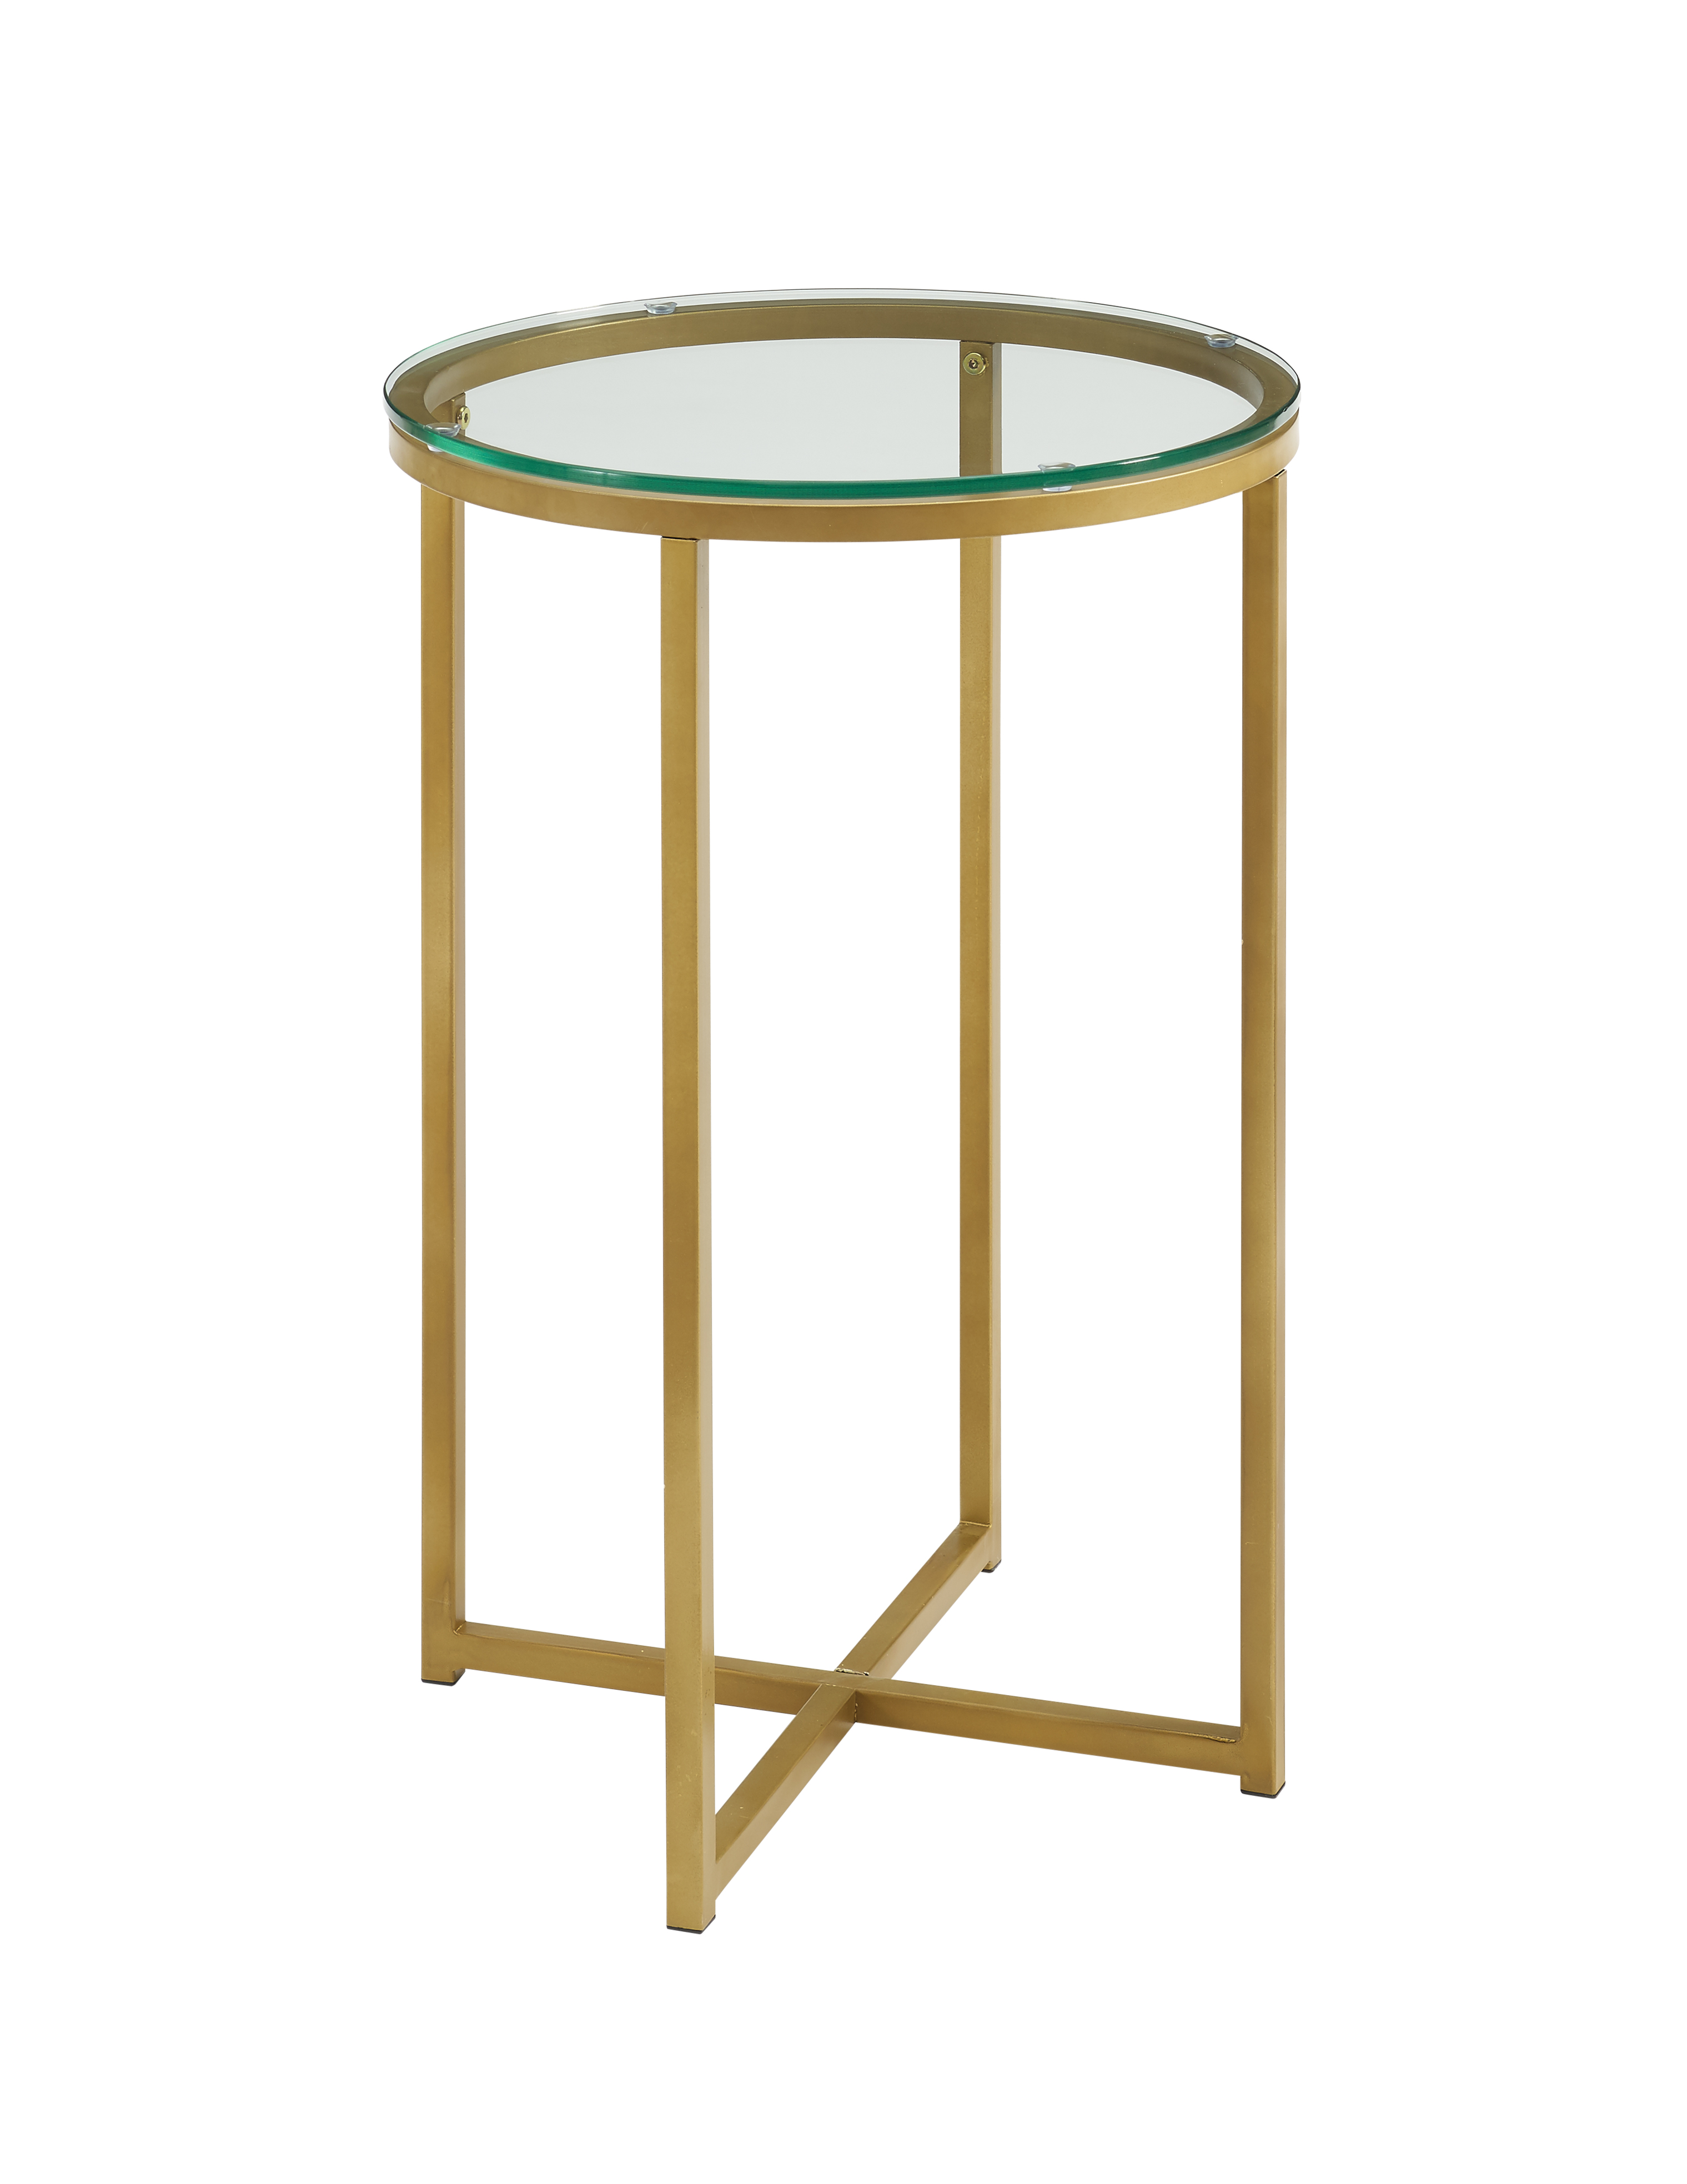 Ember Interiors Modern Glam Round End Table, Glass/Gold - image 4 of 8